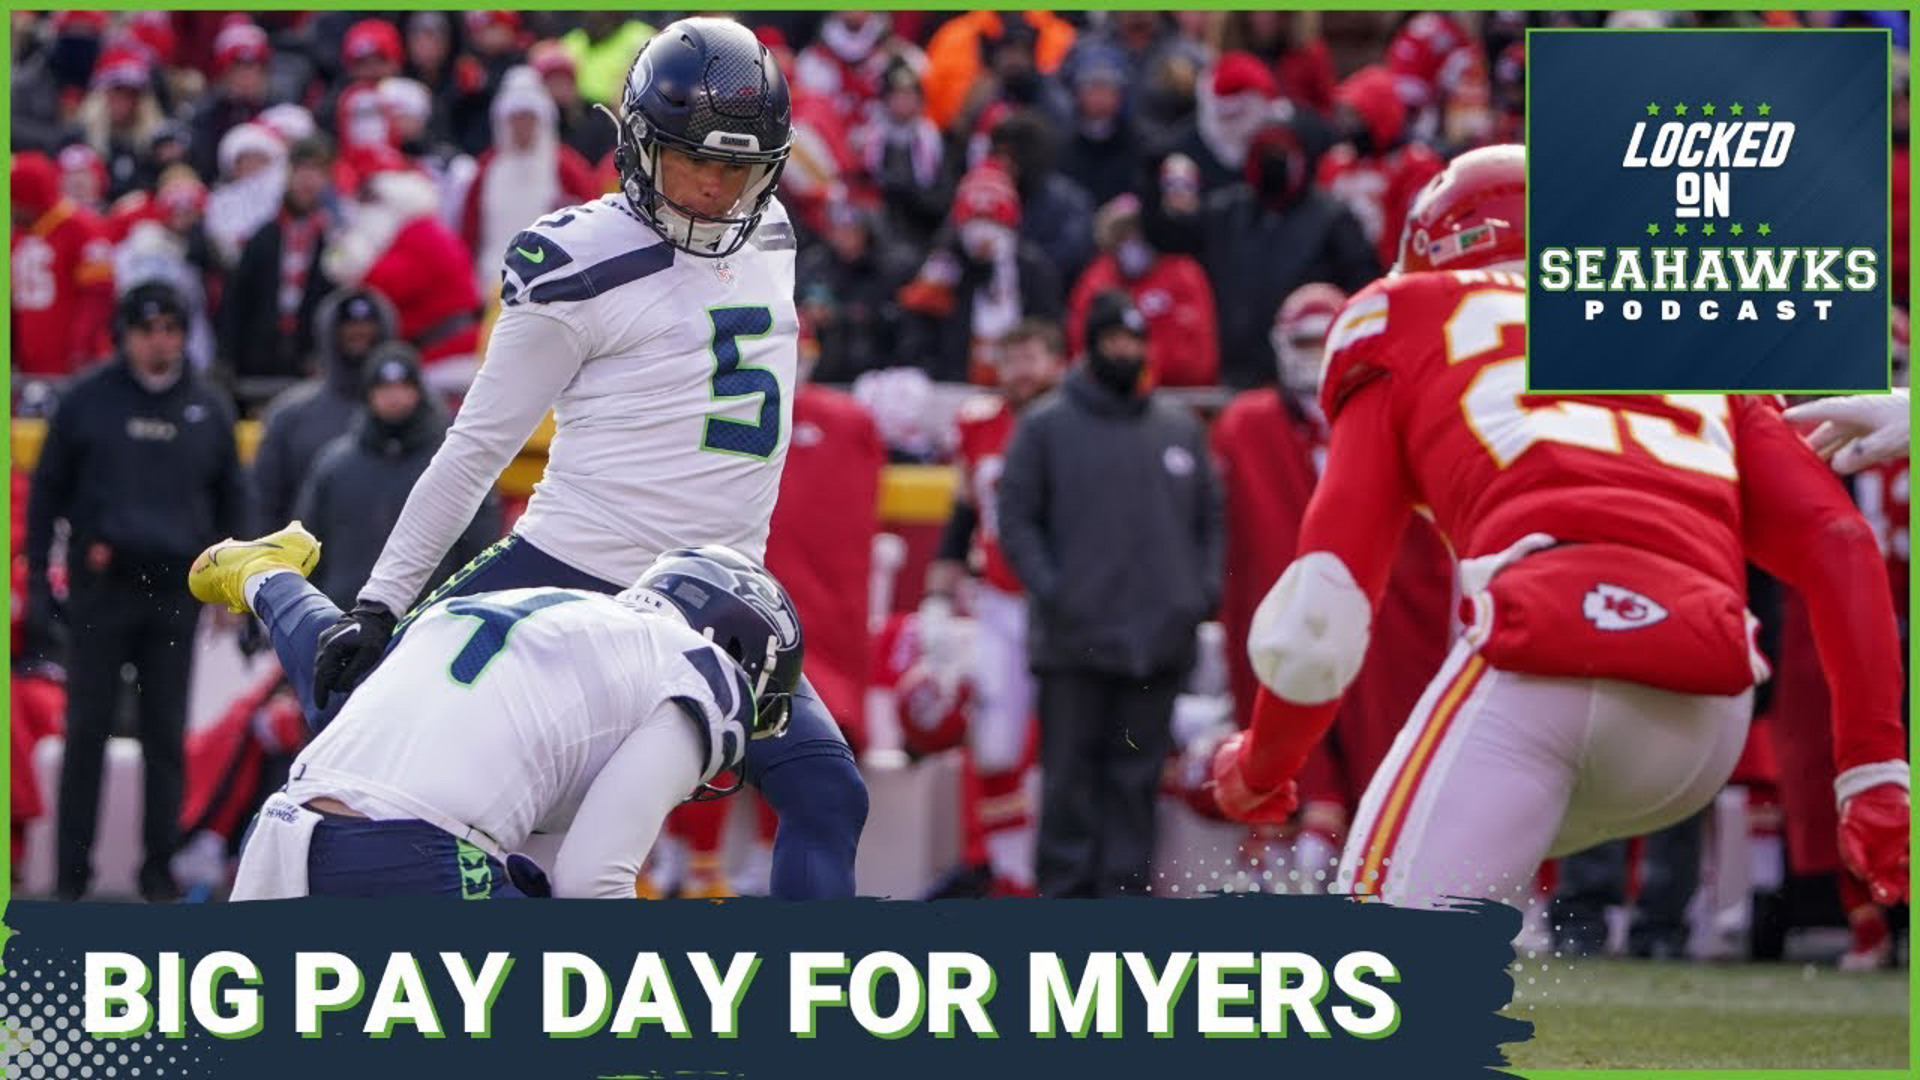 Corbin Smith and Rob Rang comb through the details of Myers' extension and why it's a smart deal for Seattle.